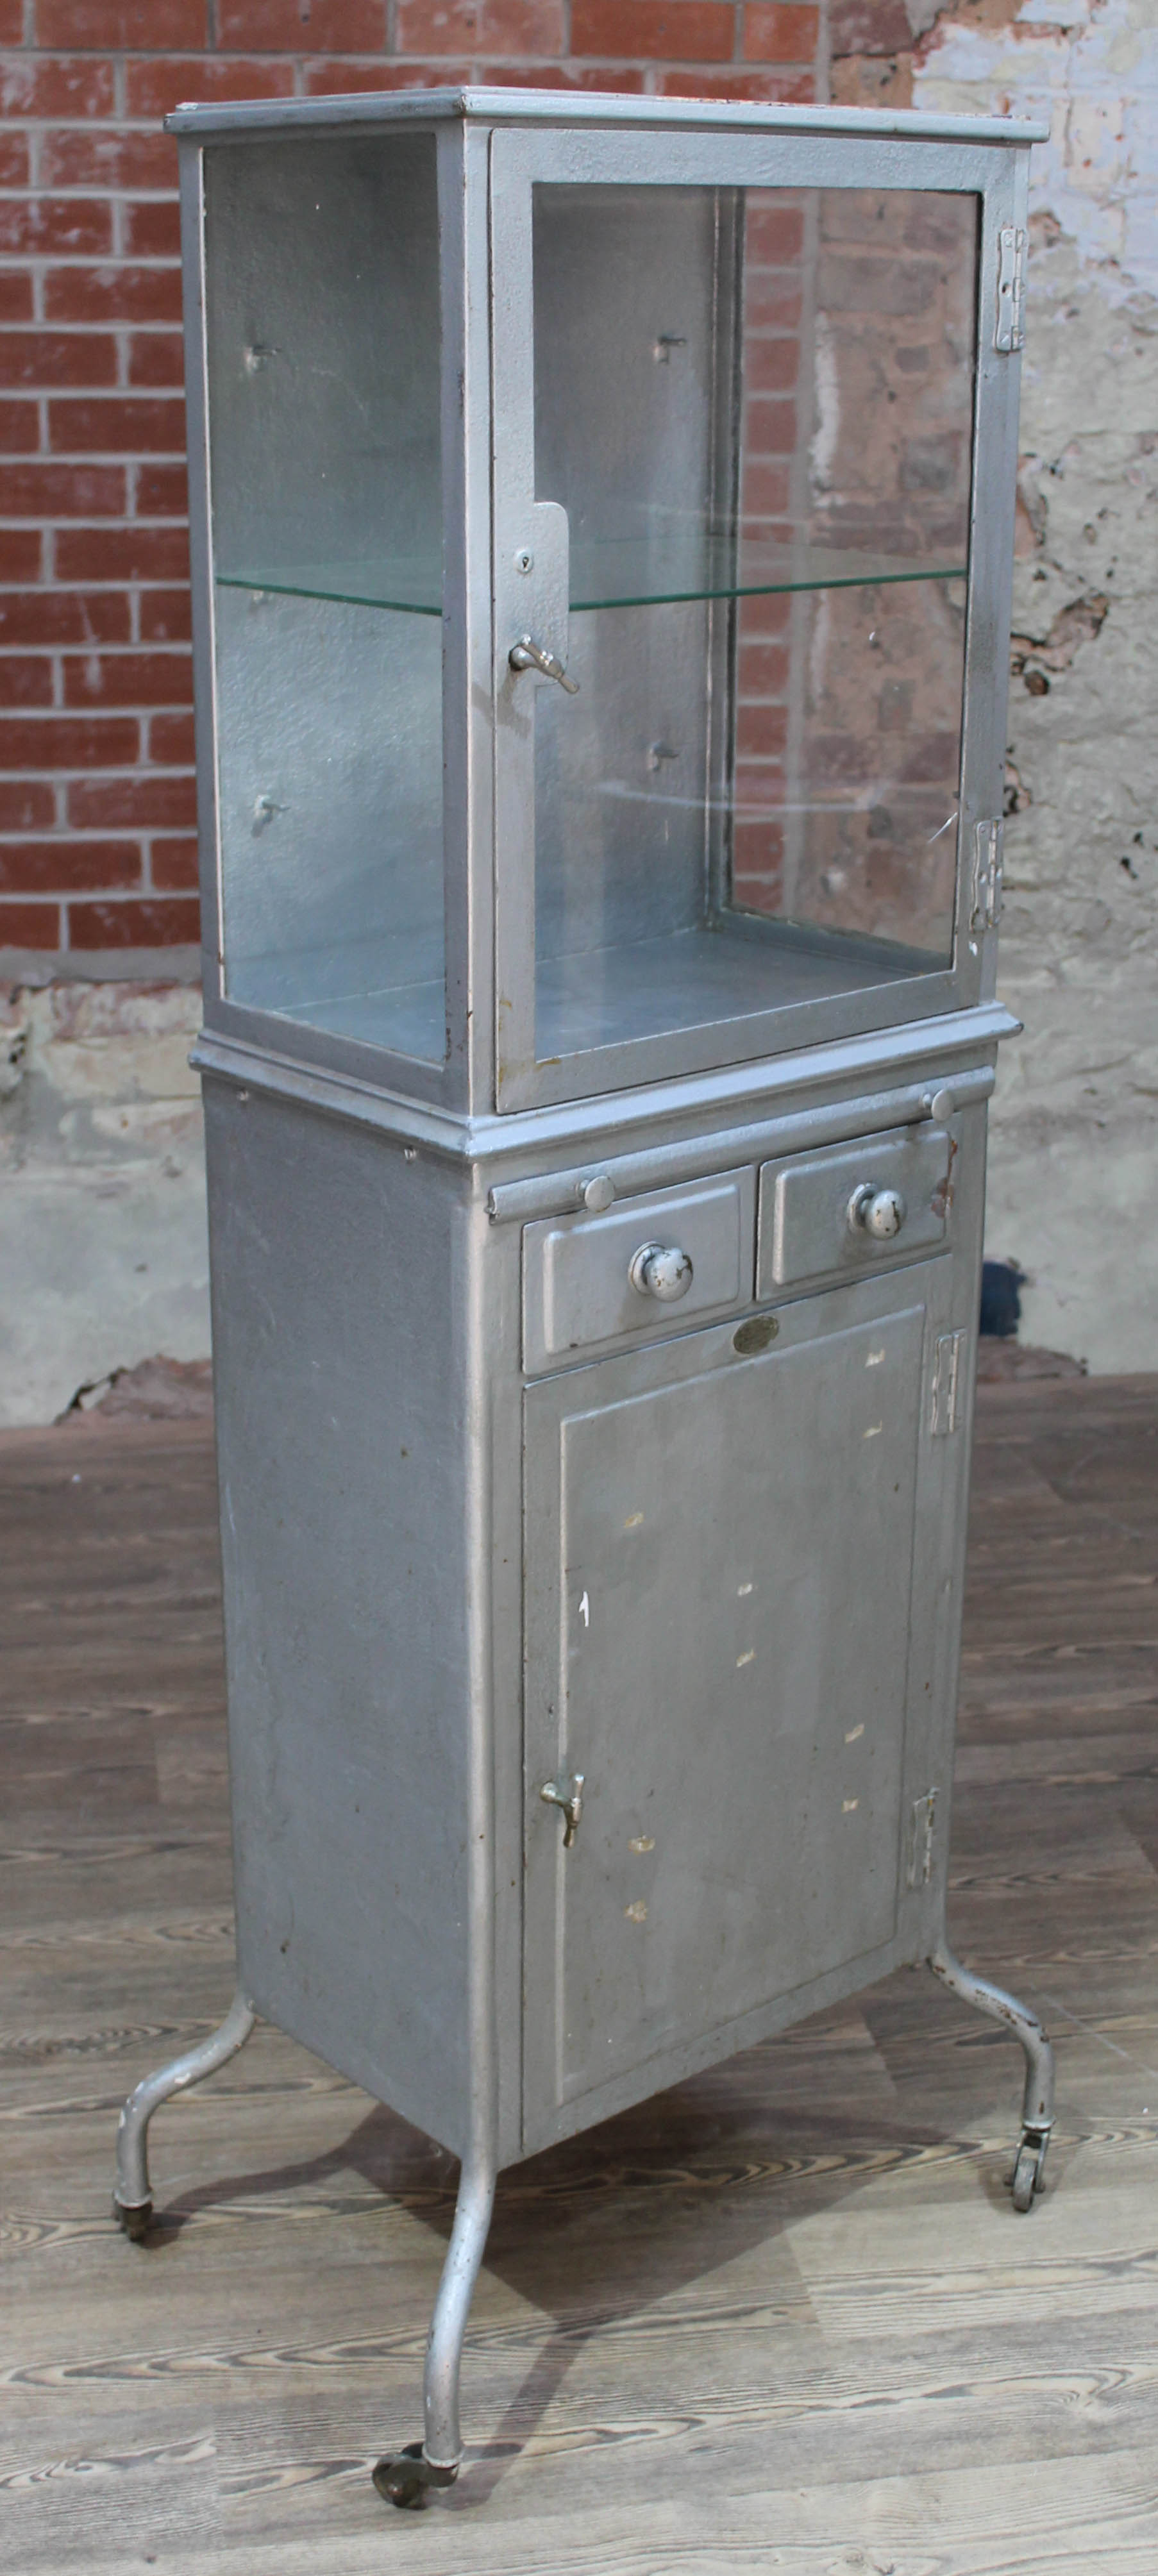 An Edwardian surgical instrument cabinet, labelled 'White & Wright Surgical Instrument Makers 93